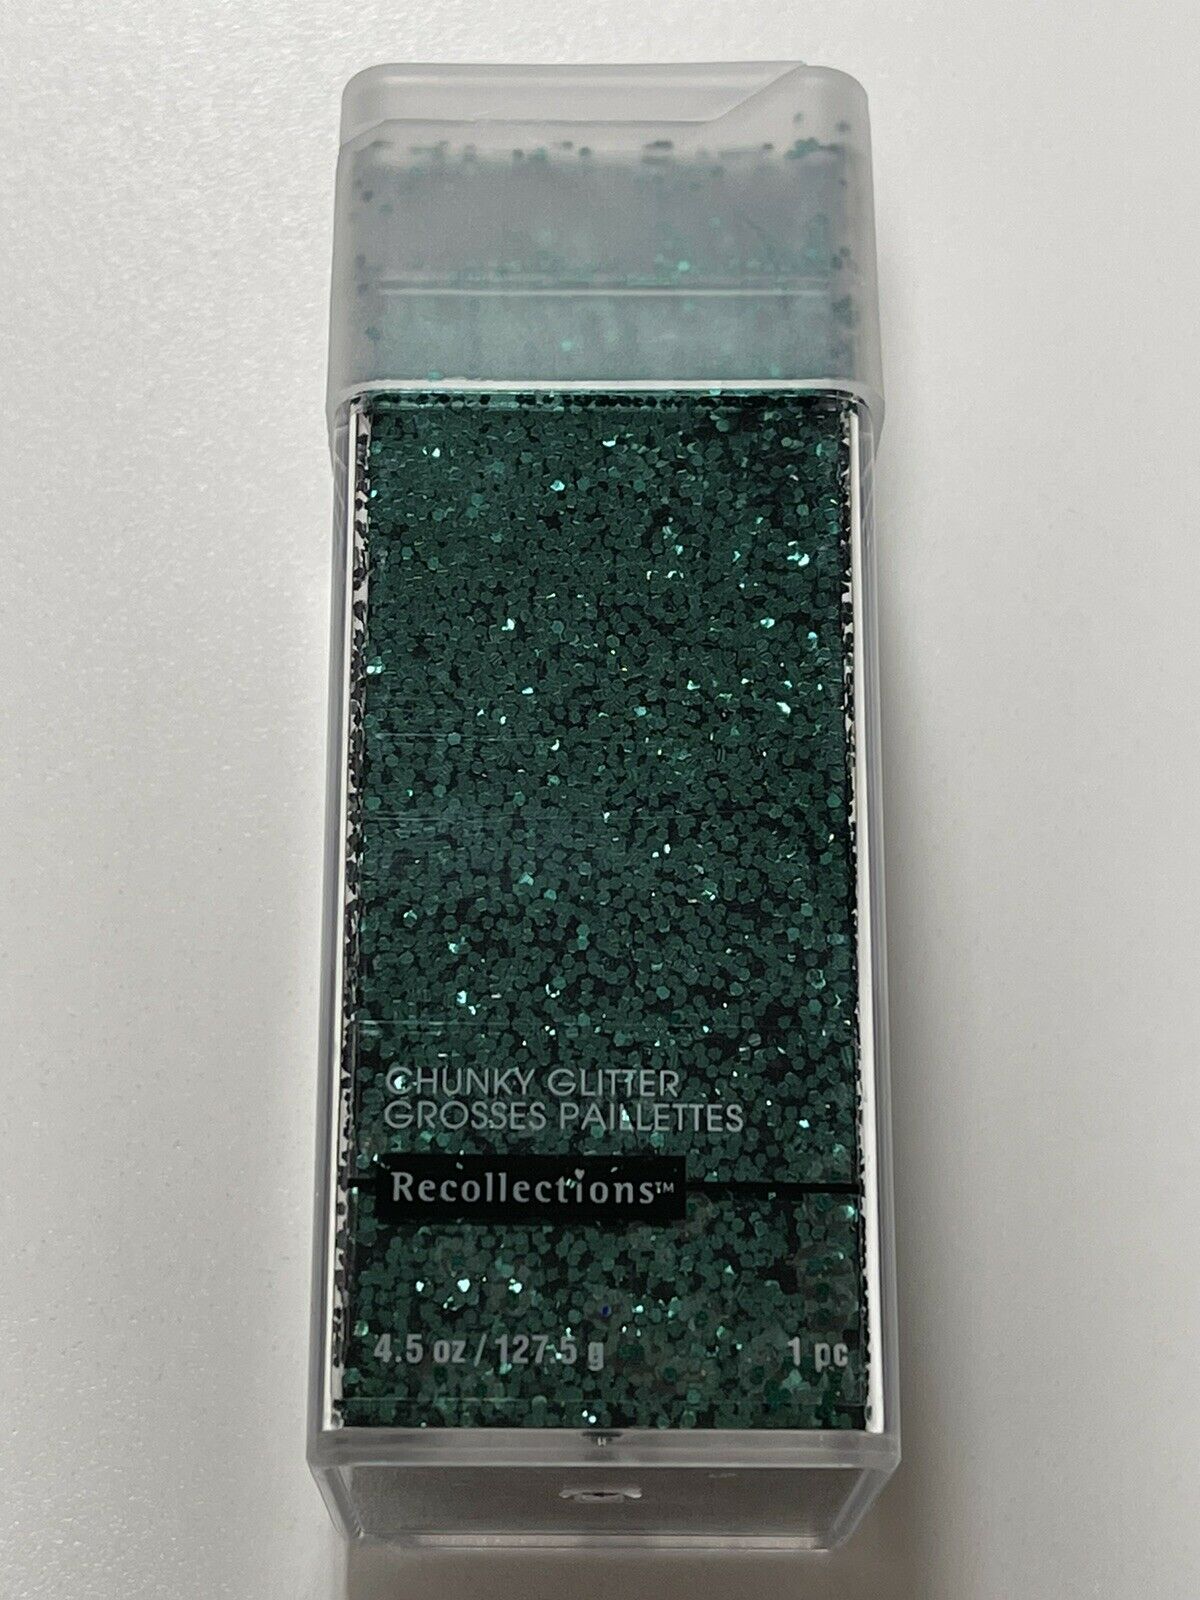 Recollections Chunky Glitter In Square Reusable Shaker 4.5 Oz “pine” Green New